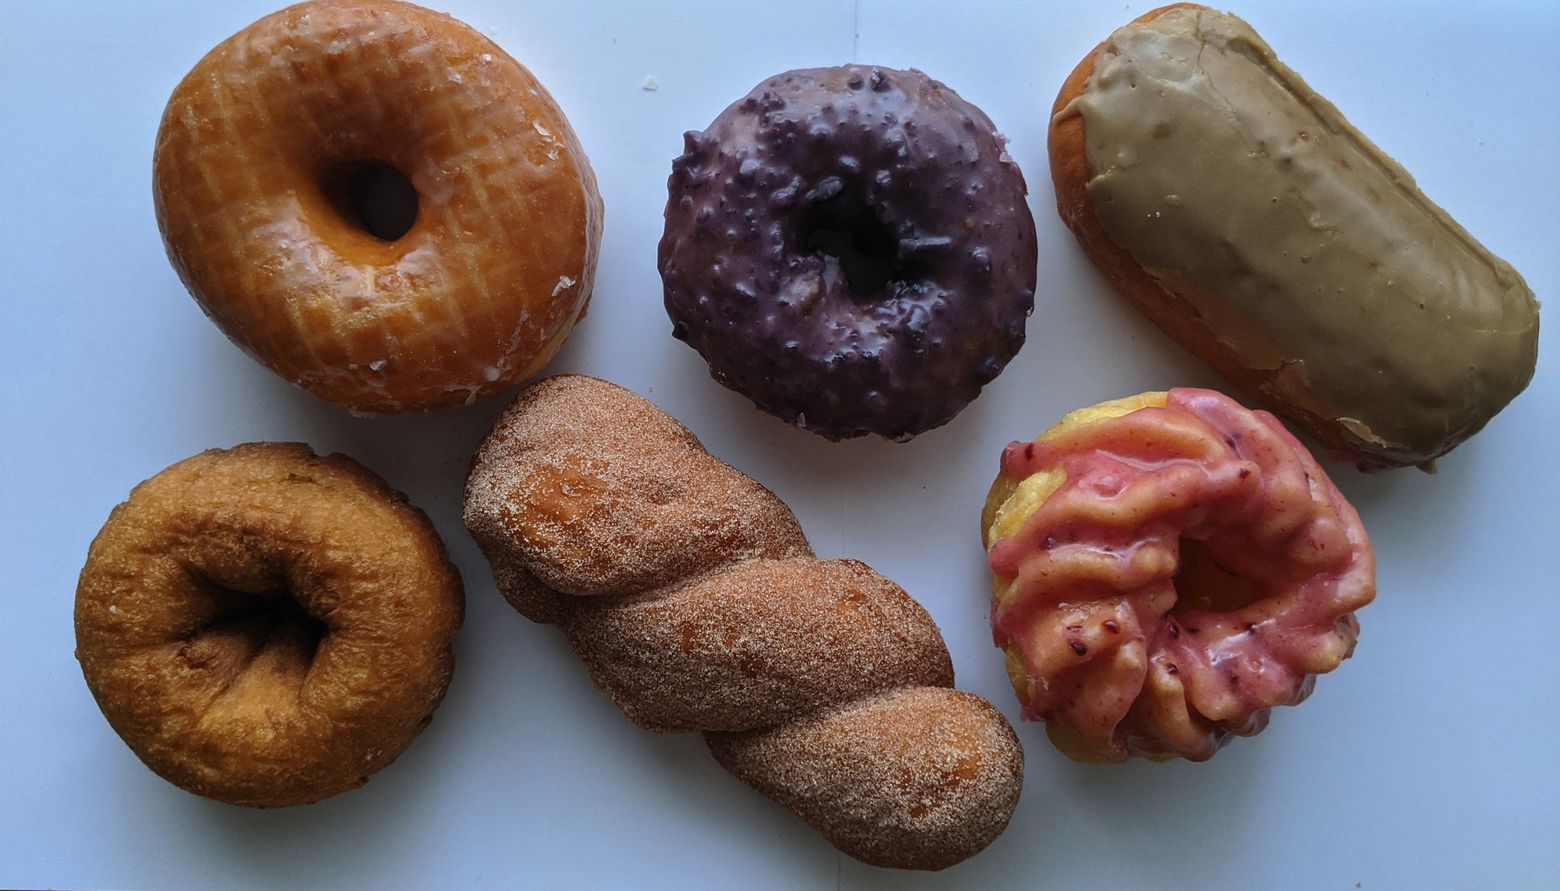 We scoured 4 Seattle-area neighborhood doughnut shops to find a great maple  bar, a to-die-for chocolate glaze and more | The Seattle Times